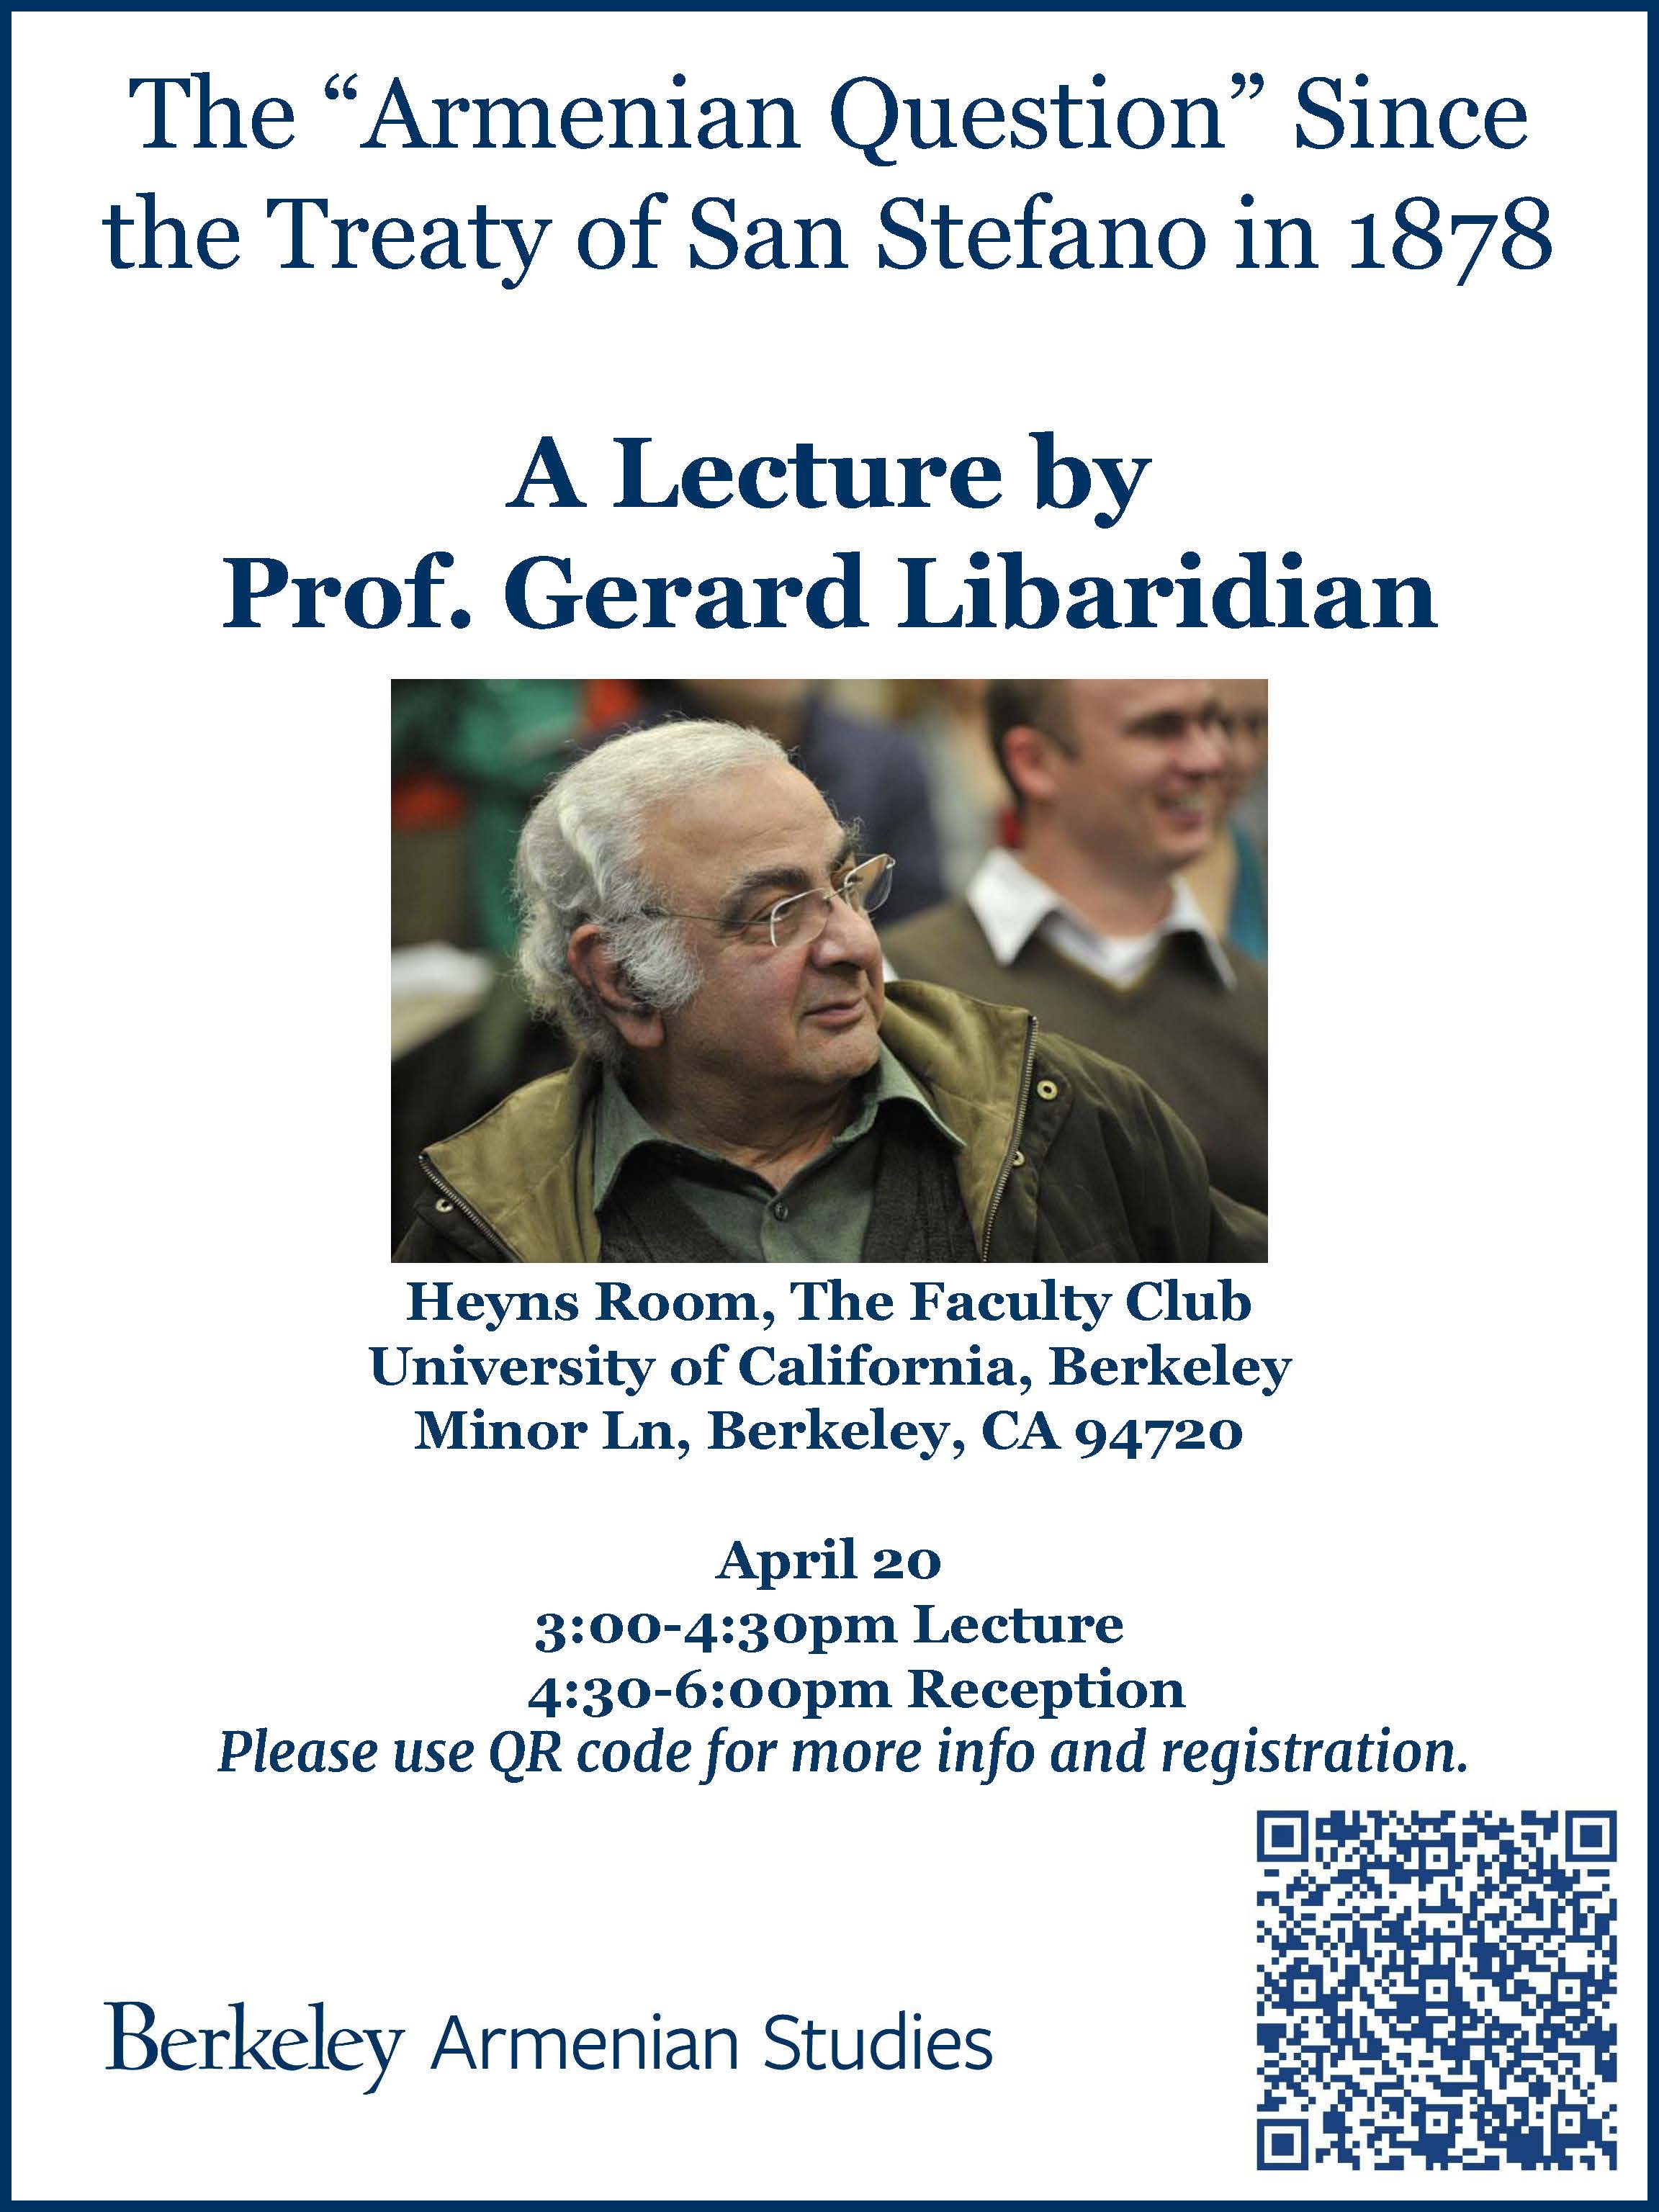 Lecture by Dr. Gerard Libaridian